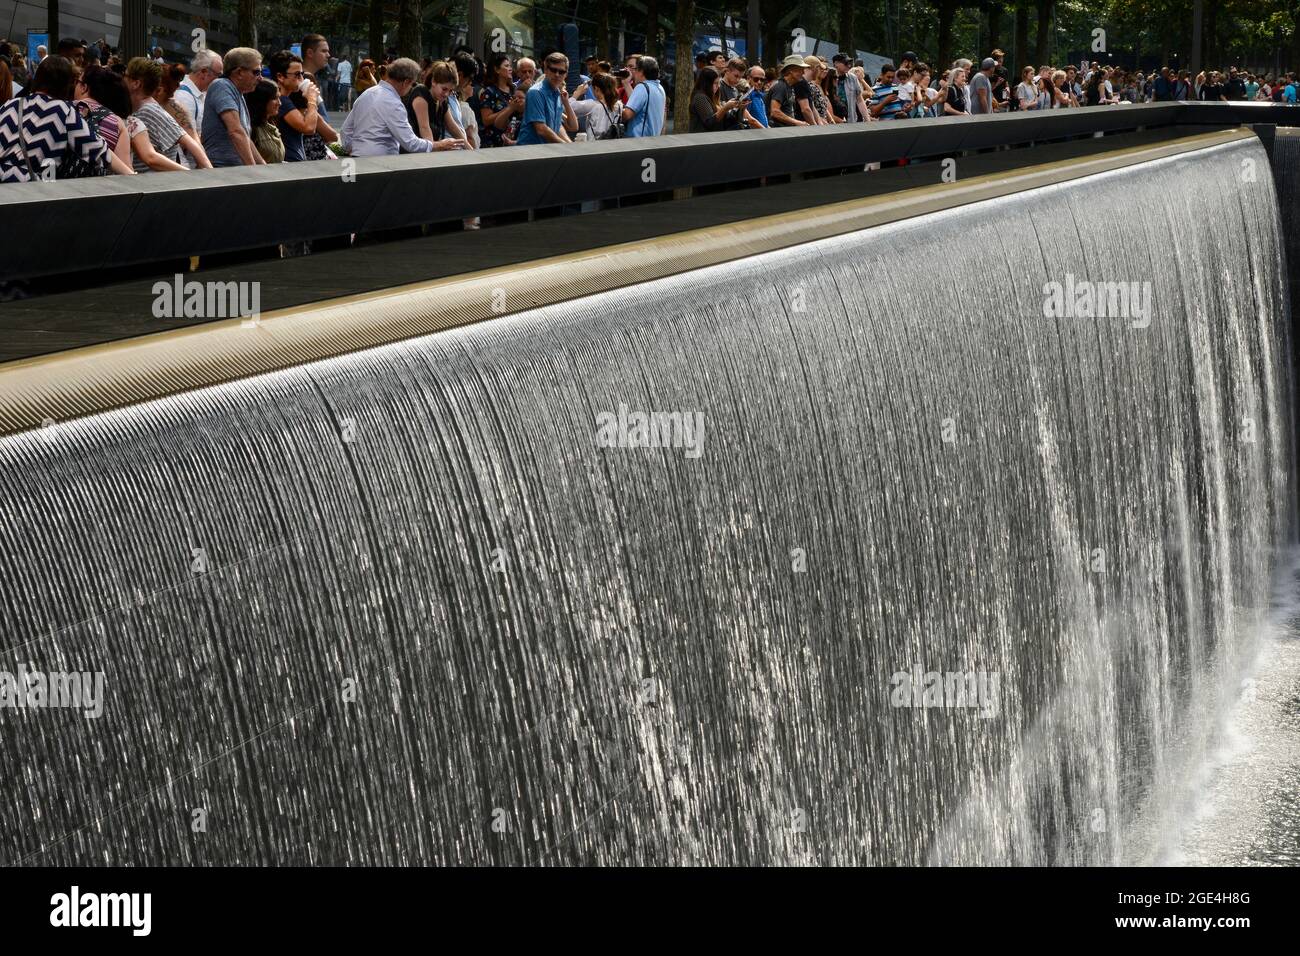 USA, New York City, 9/11 memorial Ground Zero for memory of the victims of terrorist attack of 11th September 2001 at tower of world trade center, water basin, reflecting pool , flowing water, waterfall Stock Photo